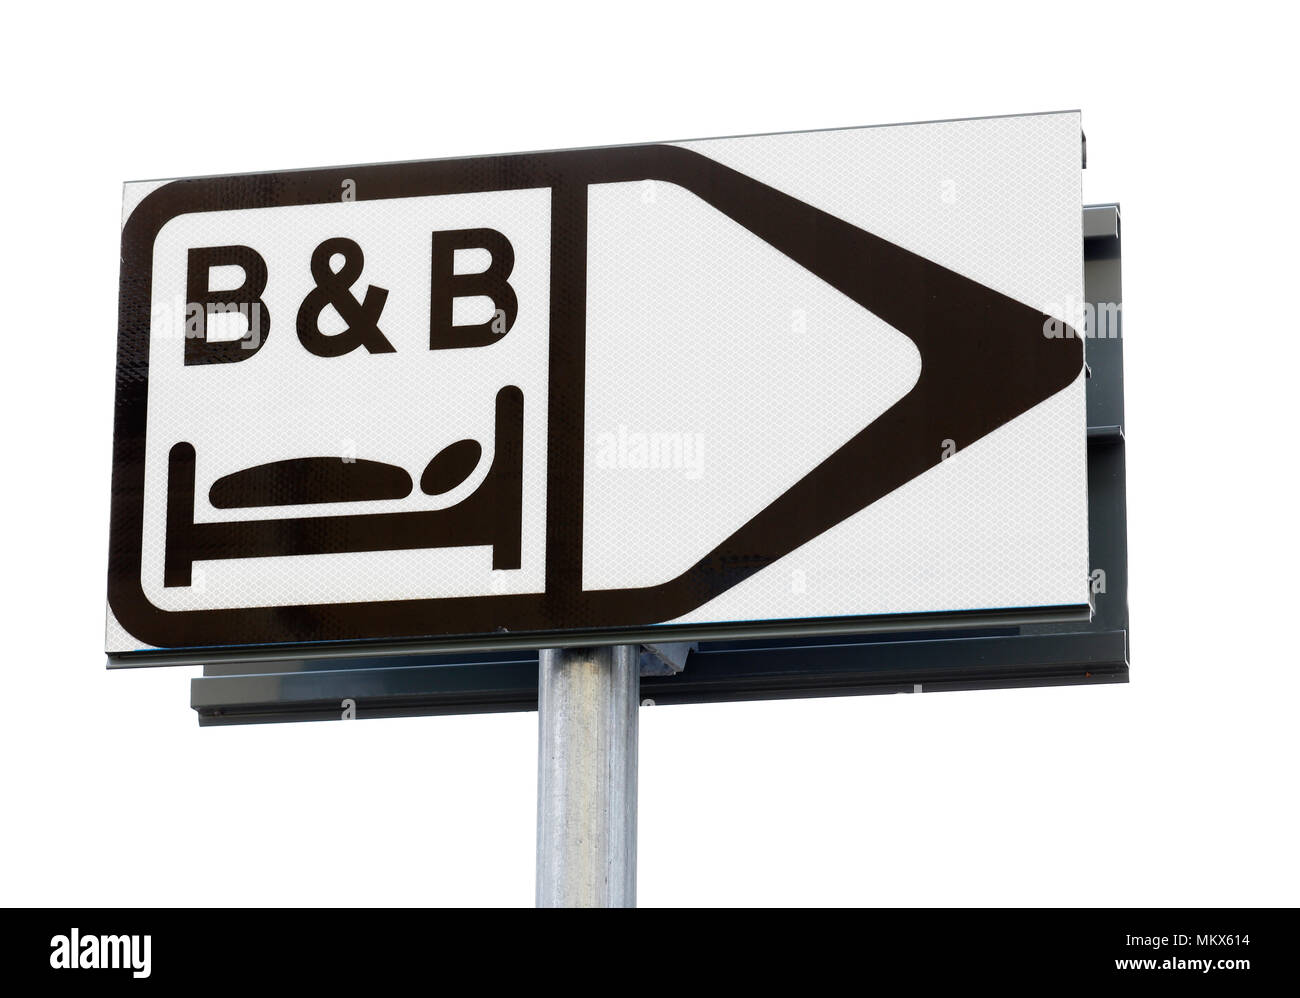 Swedish road sign directing the way towards bed and breakfast. Stock Photo